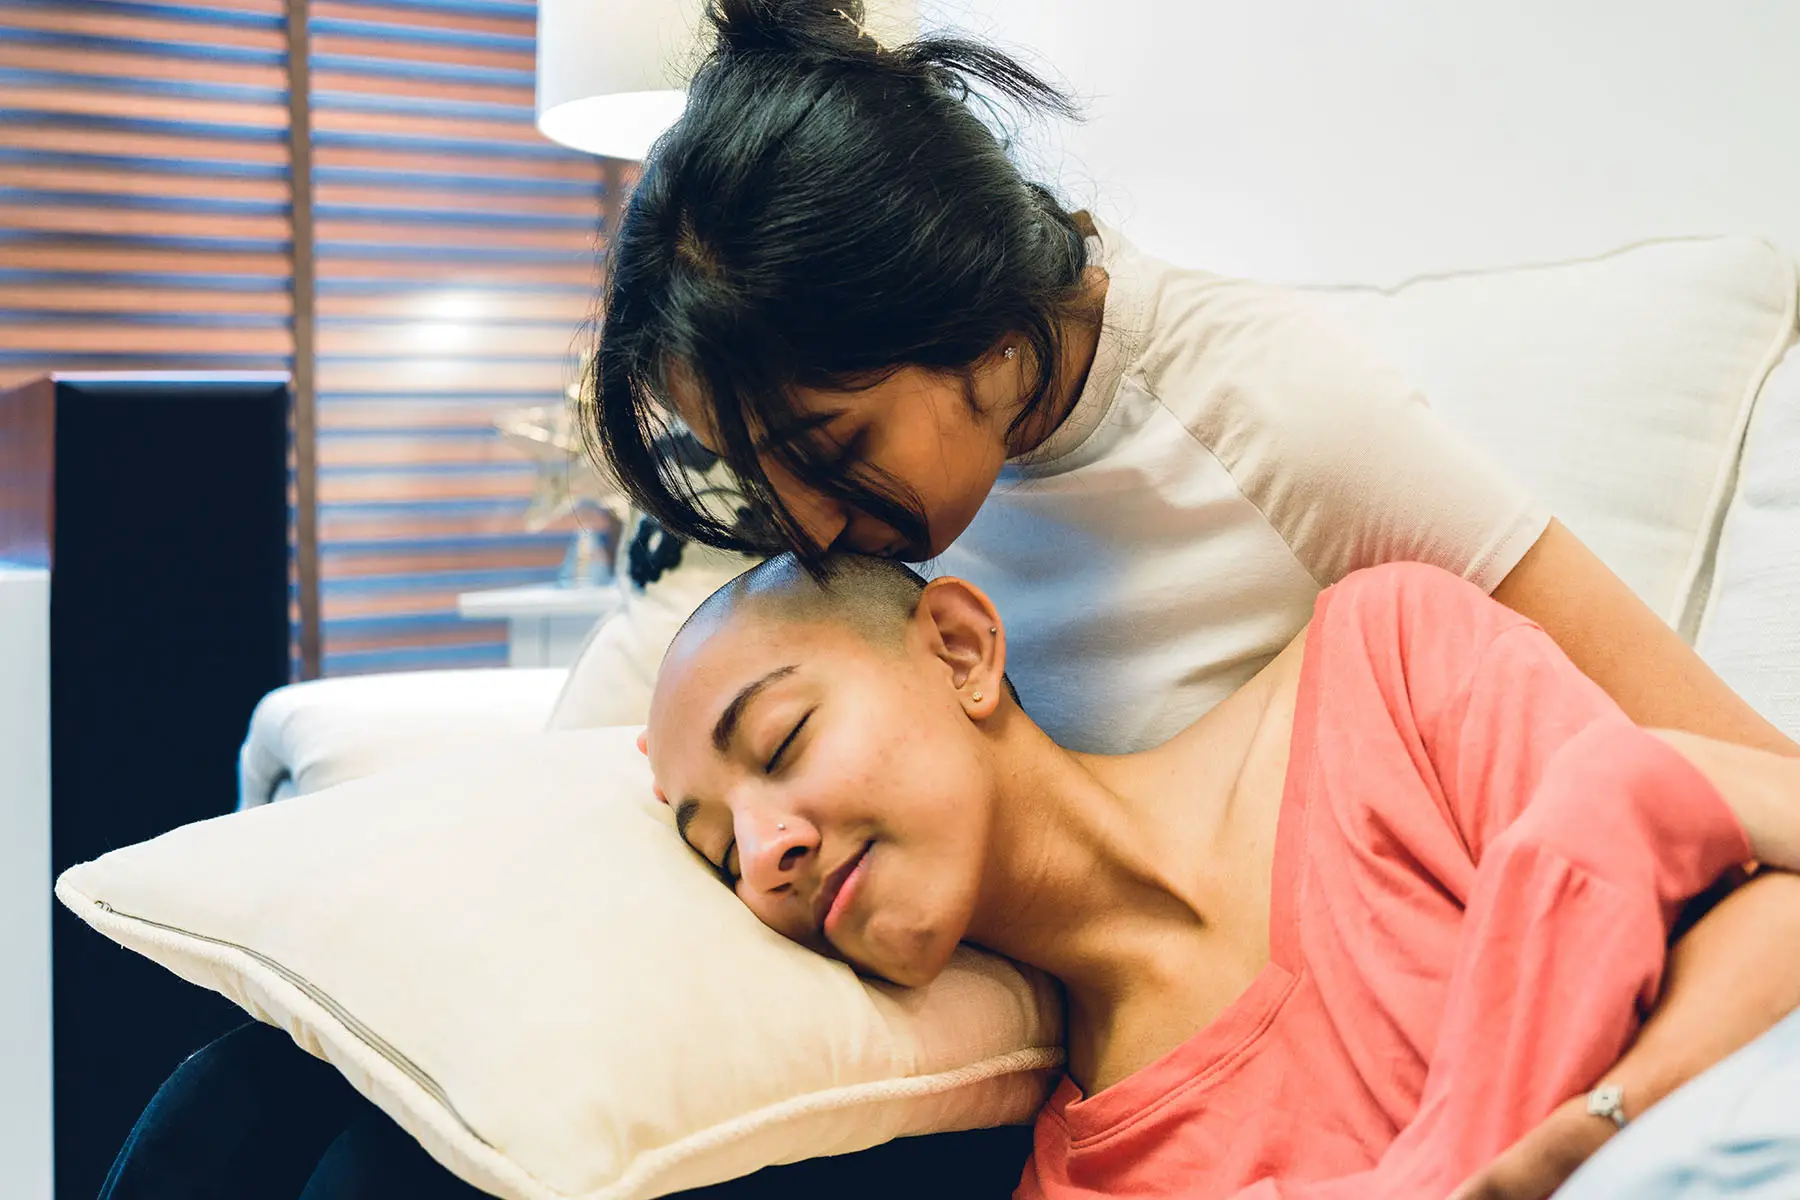 Girl with cancer lying on a pillow on someone's lap, who is leaning over to kiss her head.